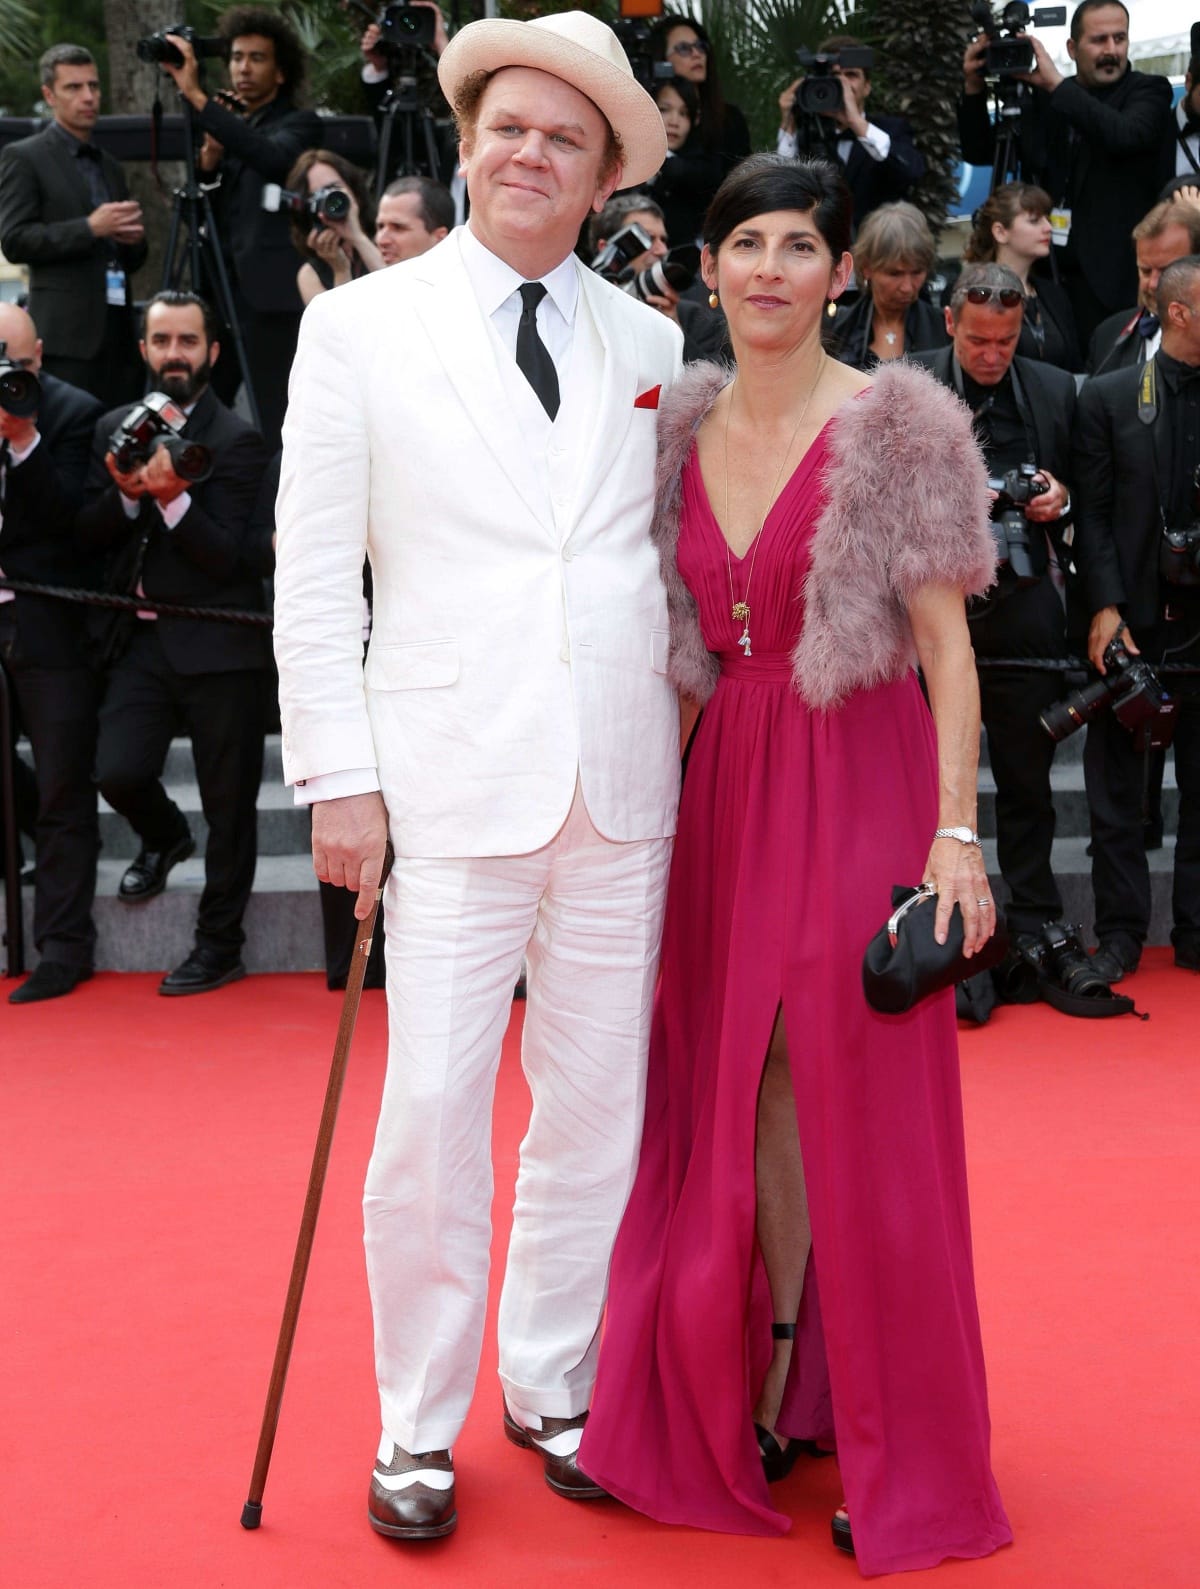 John C. Reilly looking dapper with wife Alison Dickey looking elegant during the closing ceremony of the 68th Cannes Film Festival